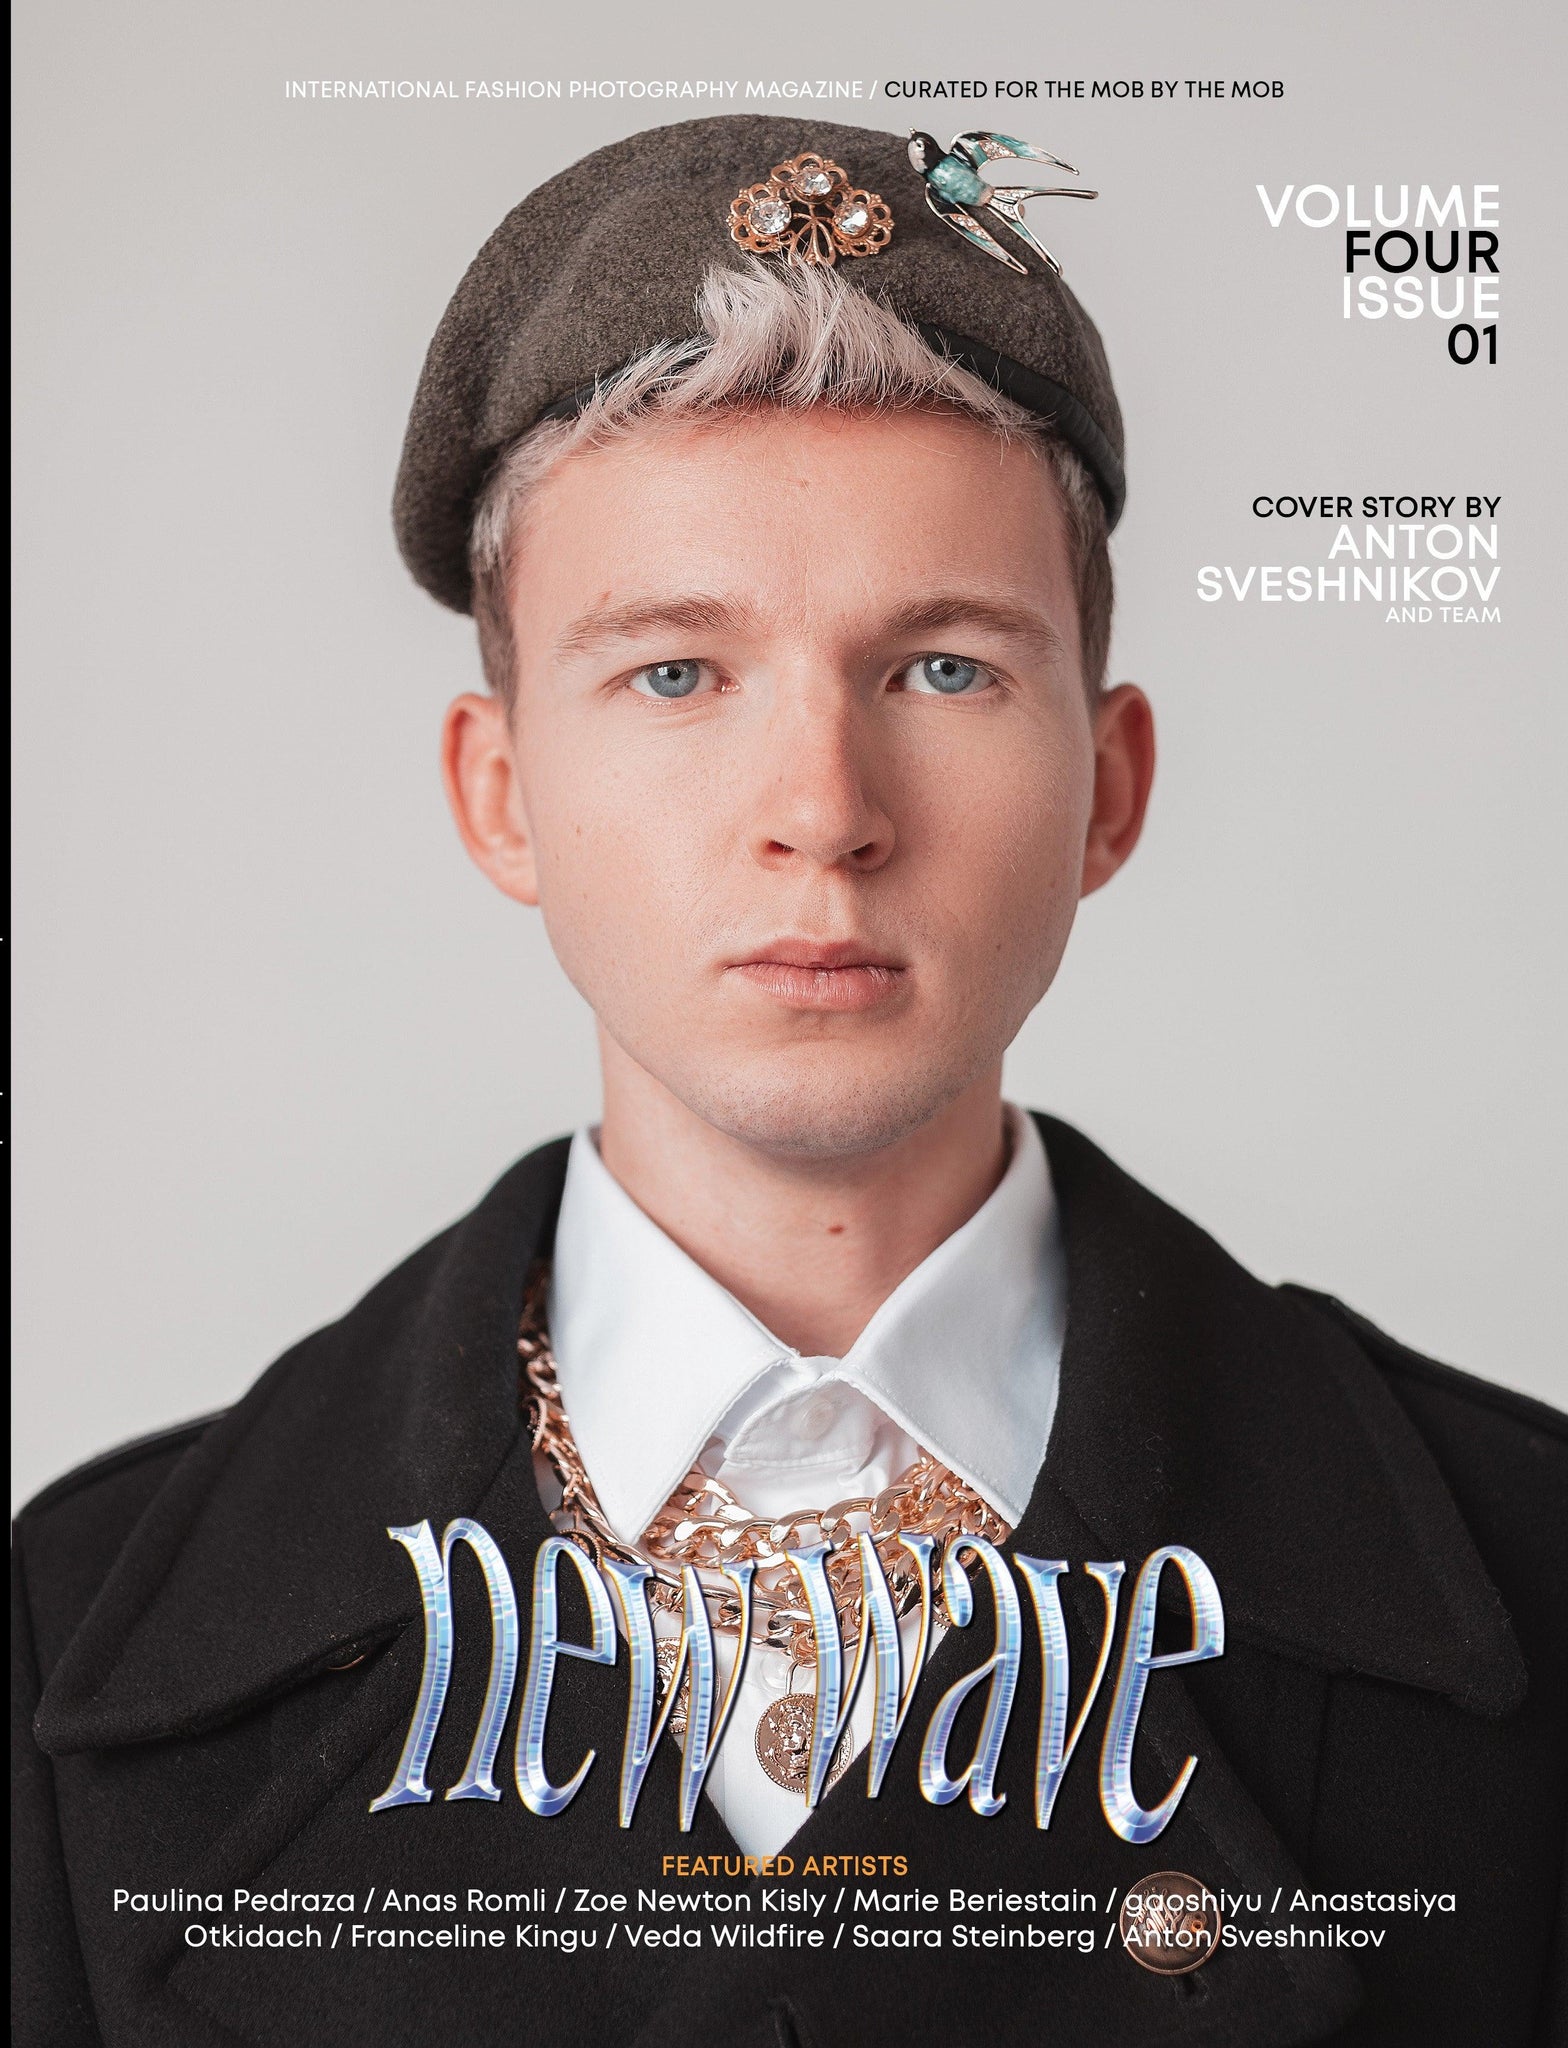 NEW WAVE | VOLUME FOUR | ISSUE #01 - Mob Journal